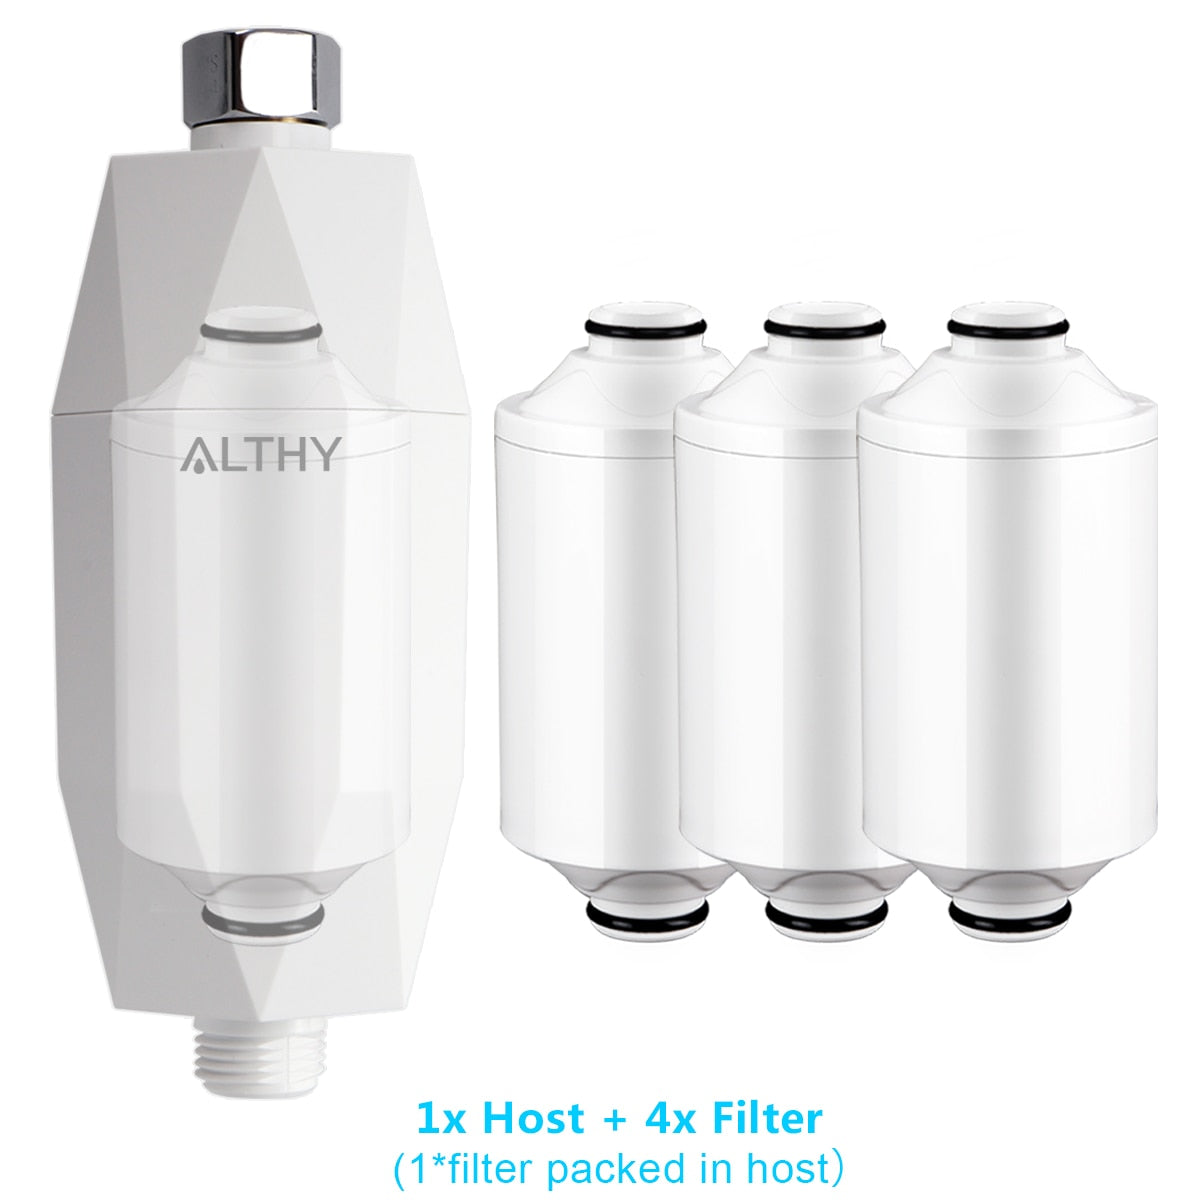 ALTHY Vitamin C Revitalizing Shower Water Filter - Reduces Chlorine Heavy Metal - Improves Dry Itchy Skin, Hair Dandruff, Eczema